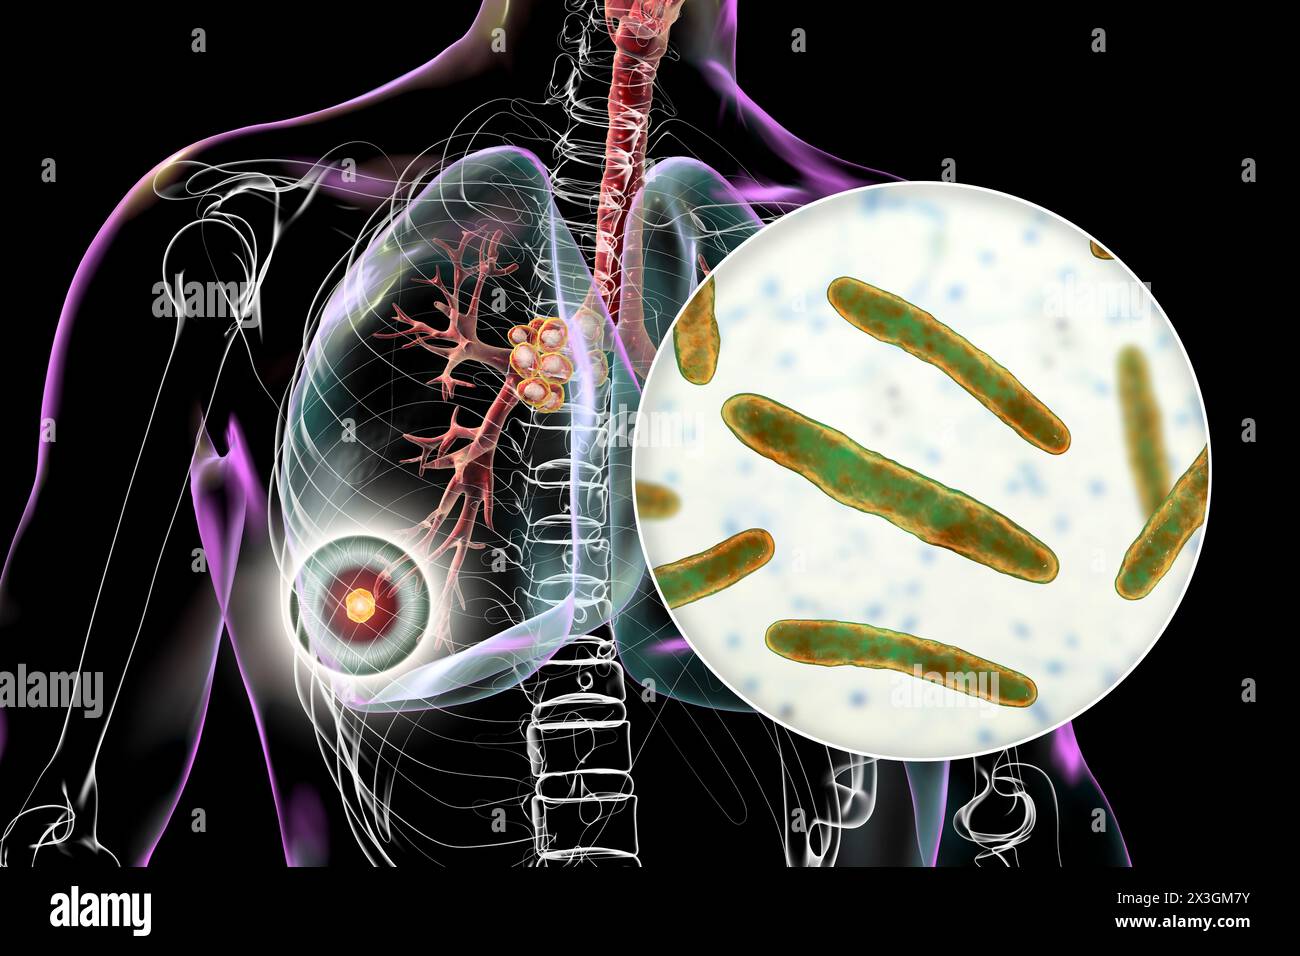 Illustration of primary lung tuberculosis with the Ranke complex, highlighting pulmonary lesions and mediastinal lymphadenitis with close-up view of Mycobacterium tuberculosis bacteria. Stock Photo